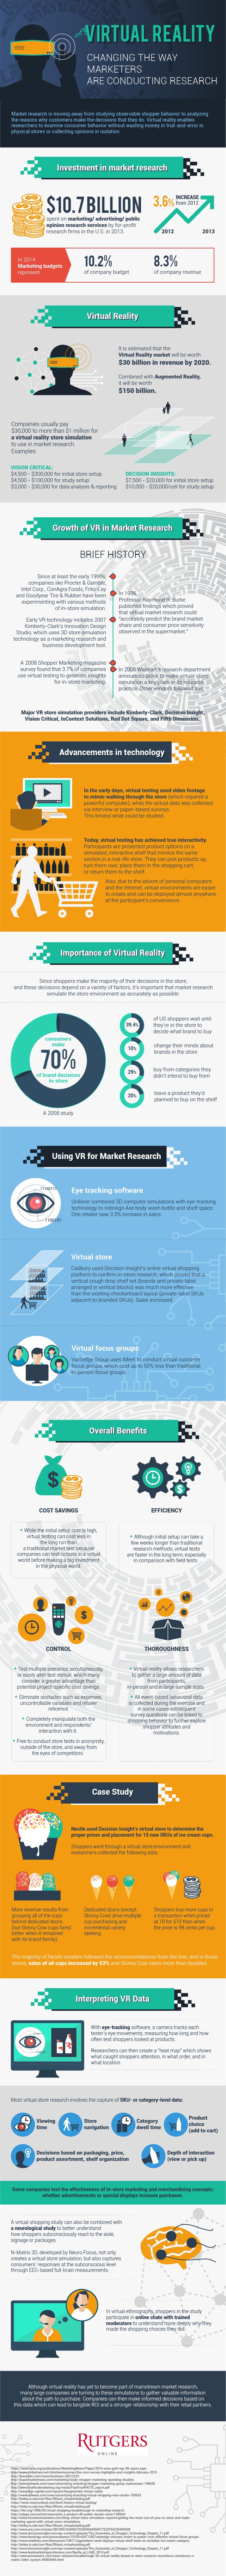 Virtual Reality: Changing the Way Marketers are Conducting Research #Infographic...